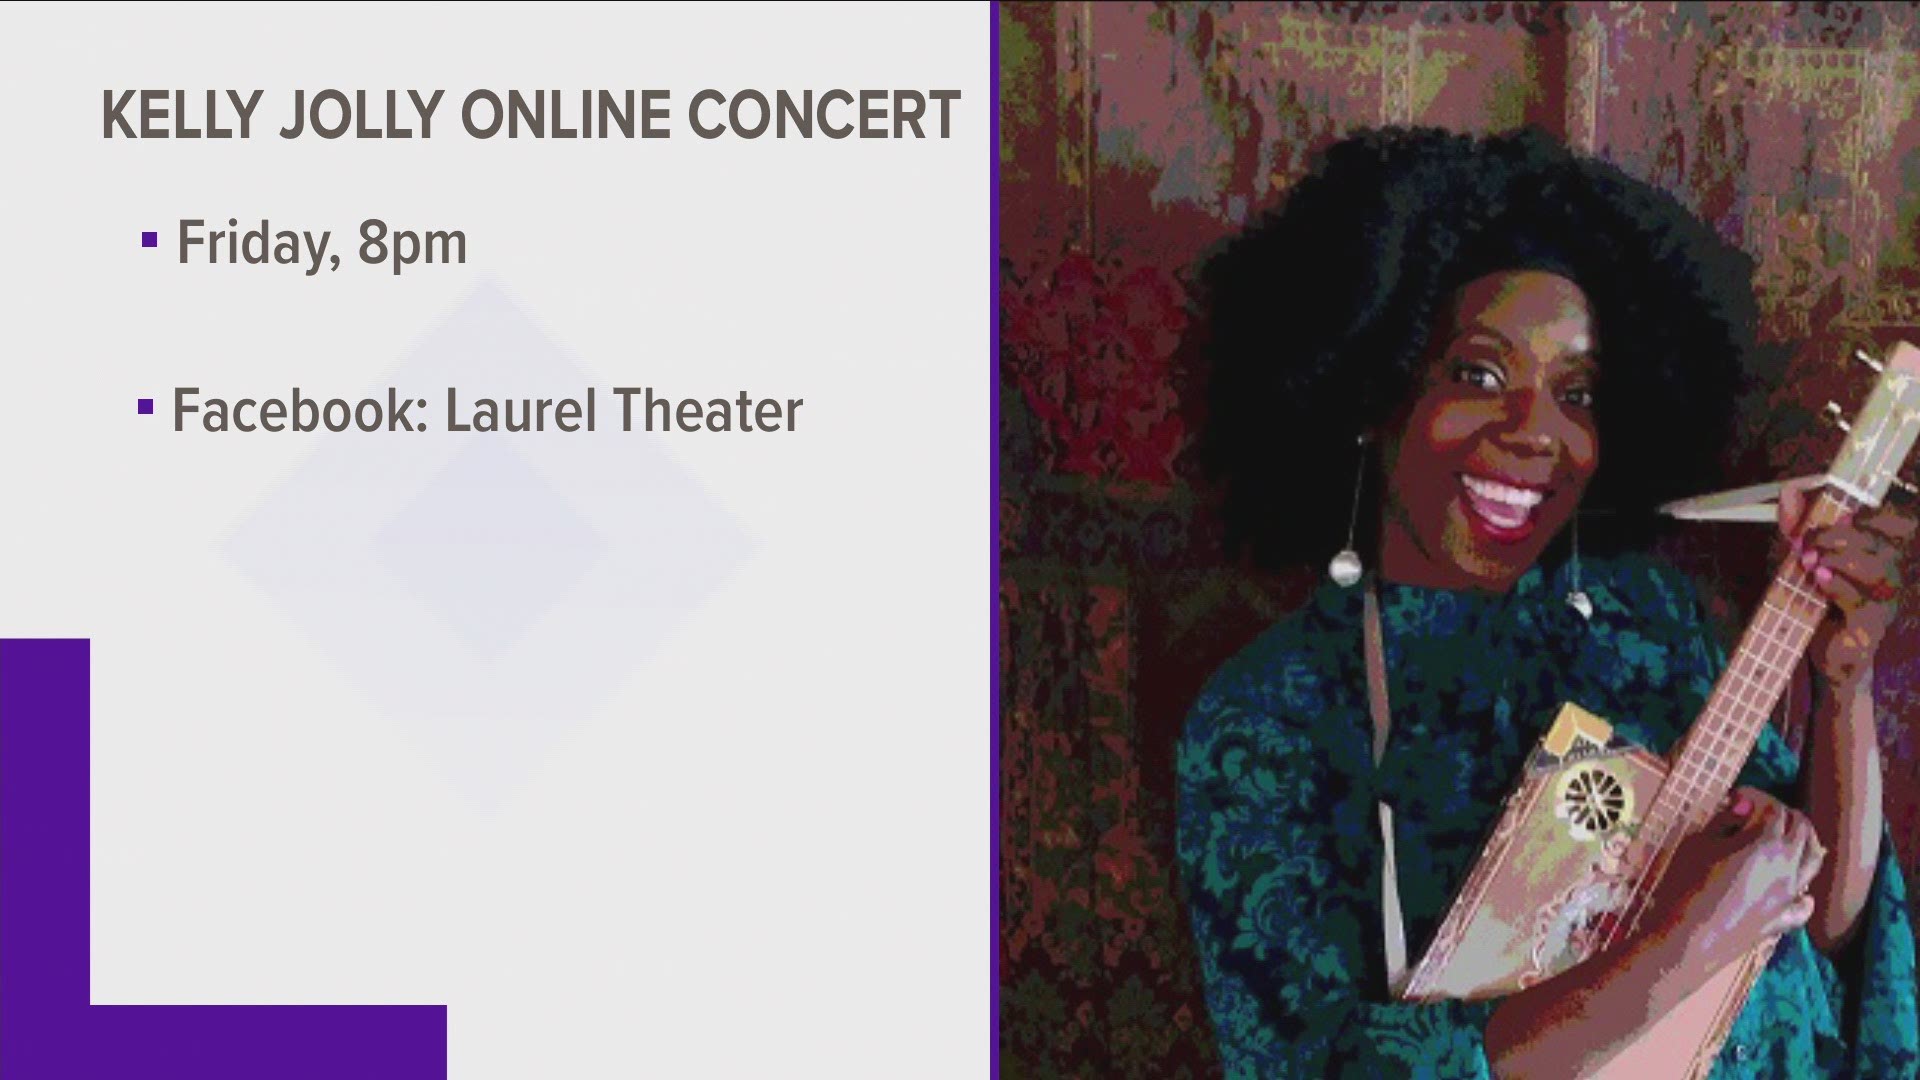 Kelle Jolly's online concert is Dec. 4 at 8pm on the Laurel Theater's Facebook page. Nov. 30, 2020-4pm.